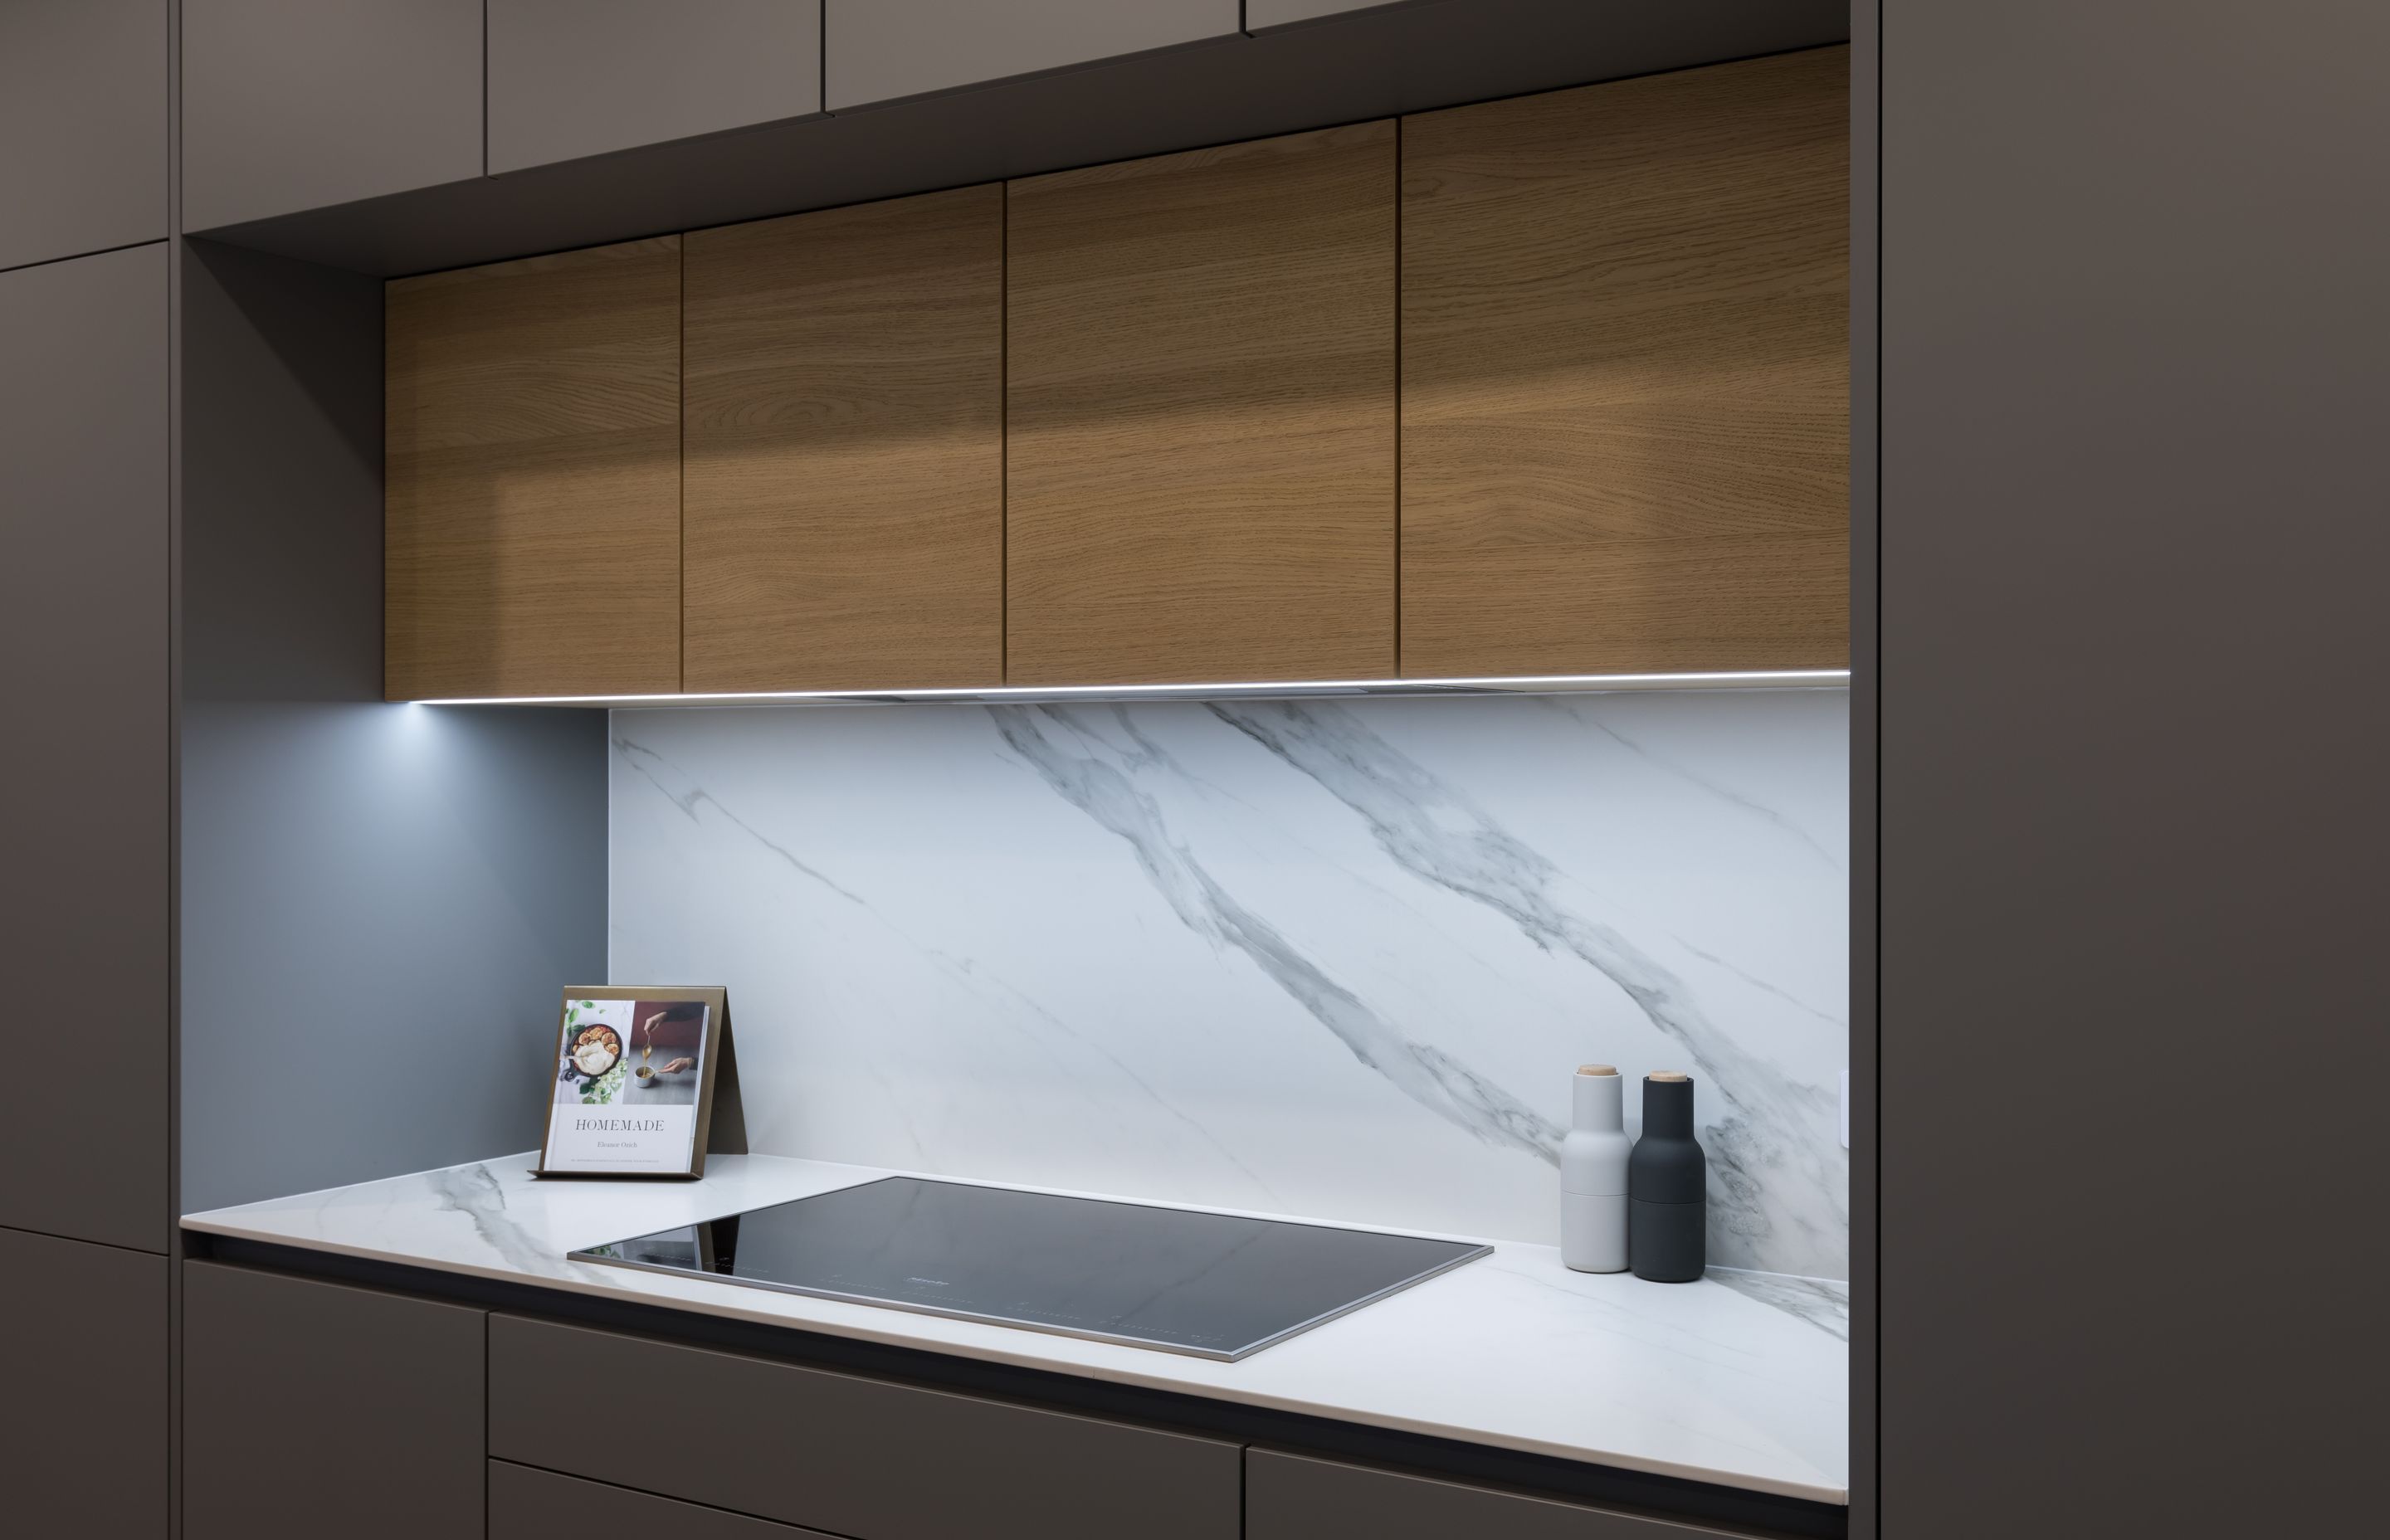 The combination of Stone Grey, Classic Oak and marble-look Opera by Dekton finishes answers the clients' brief for a limited material palette.